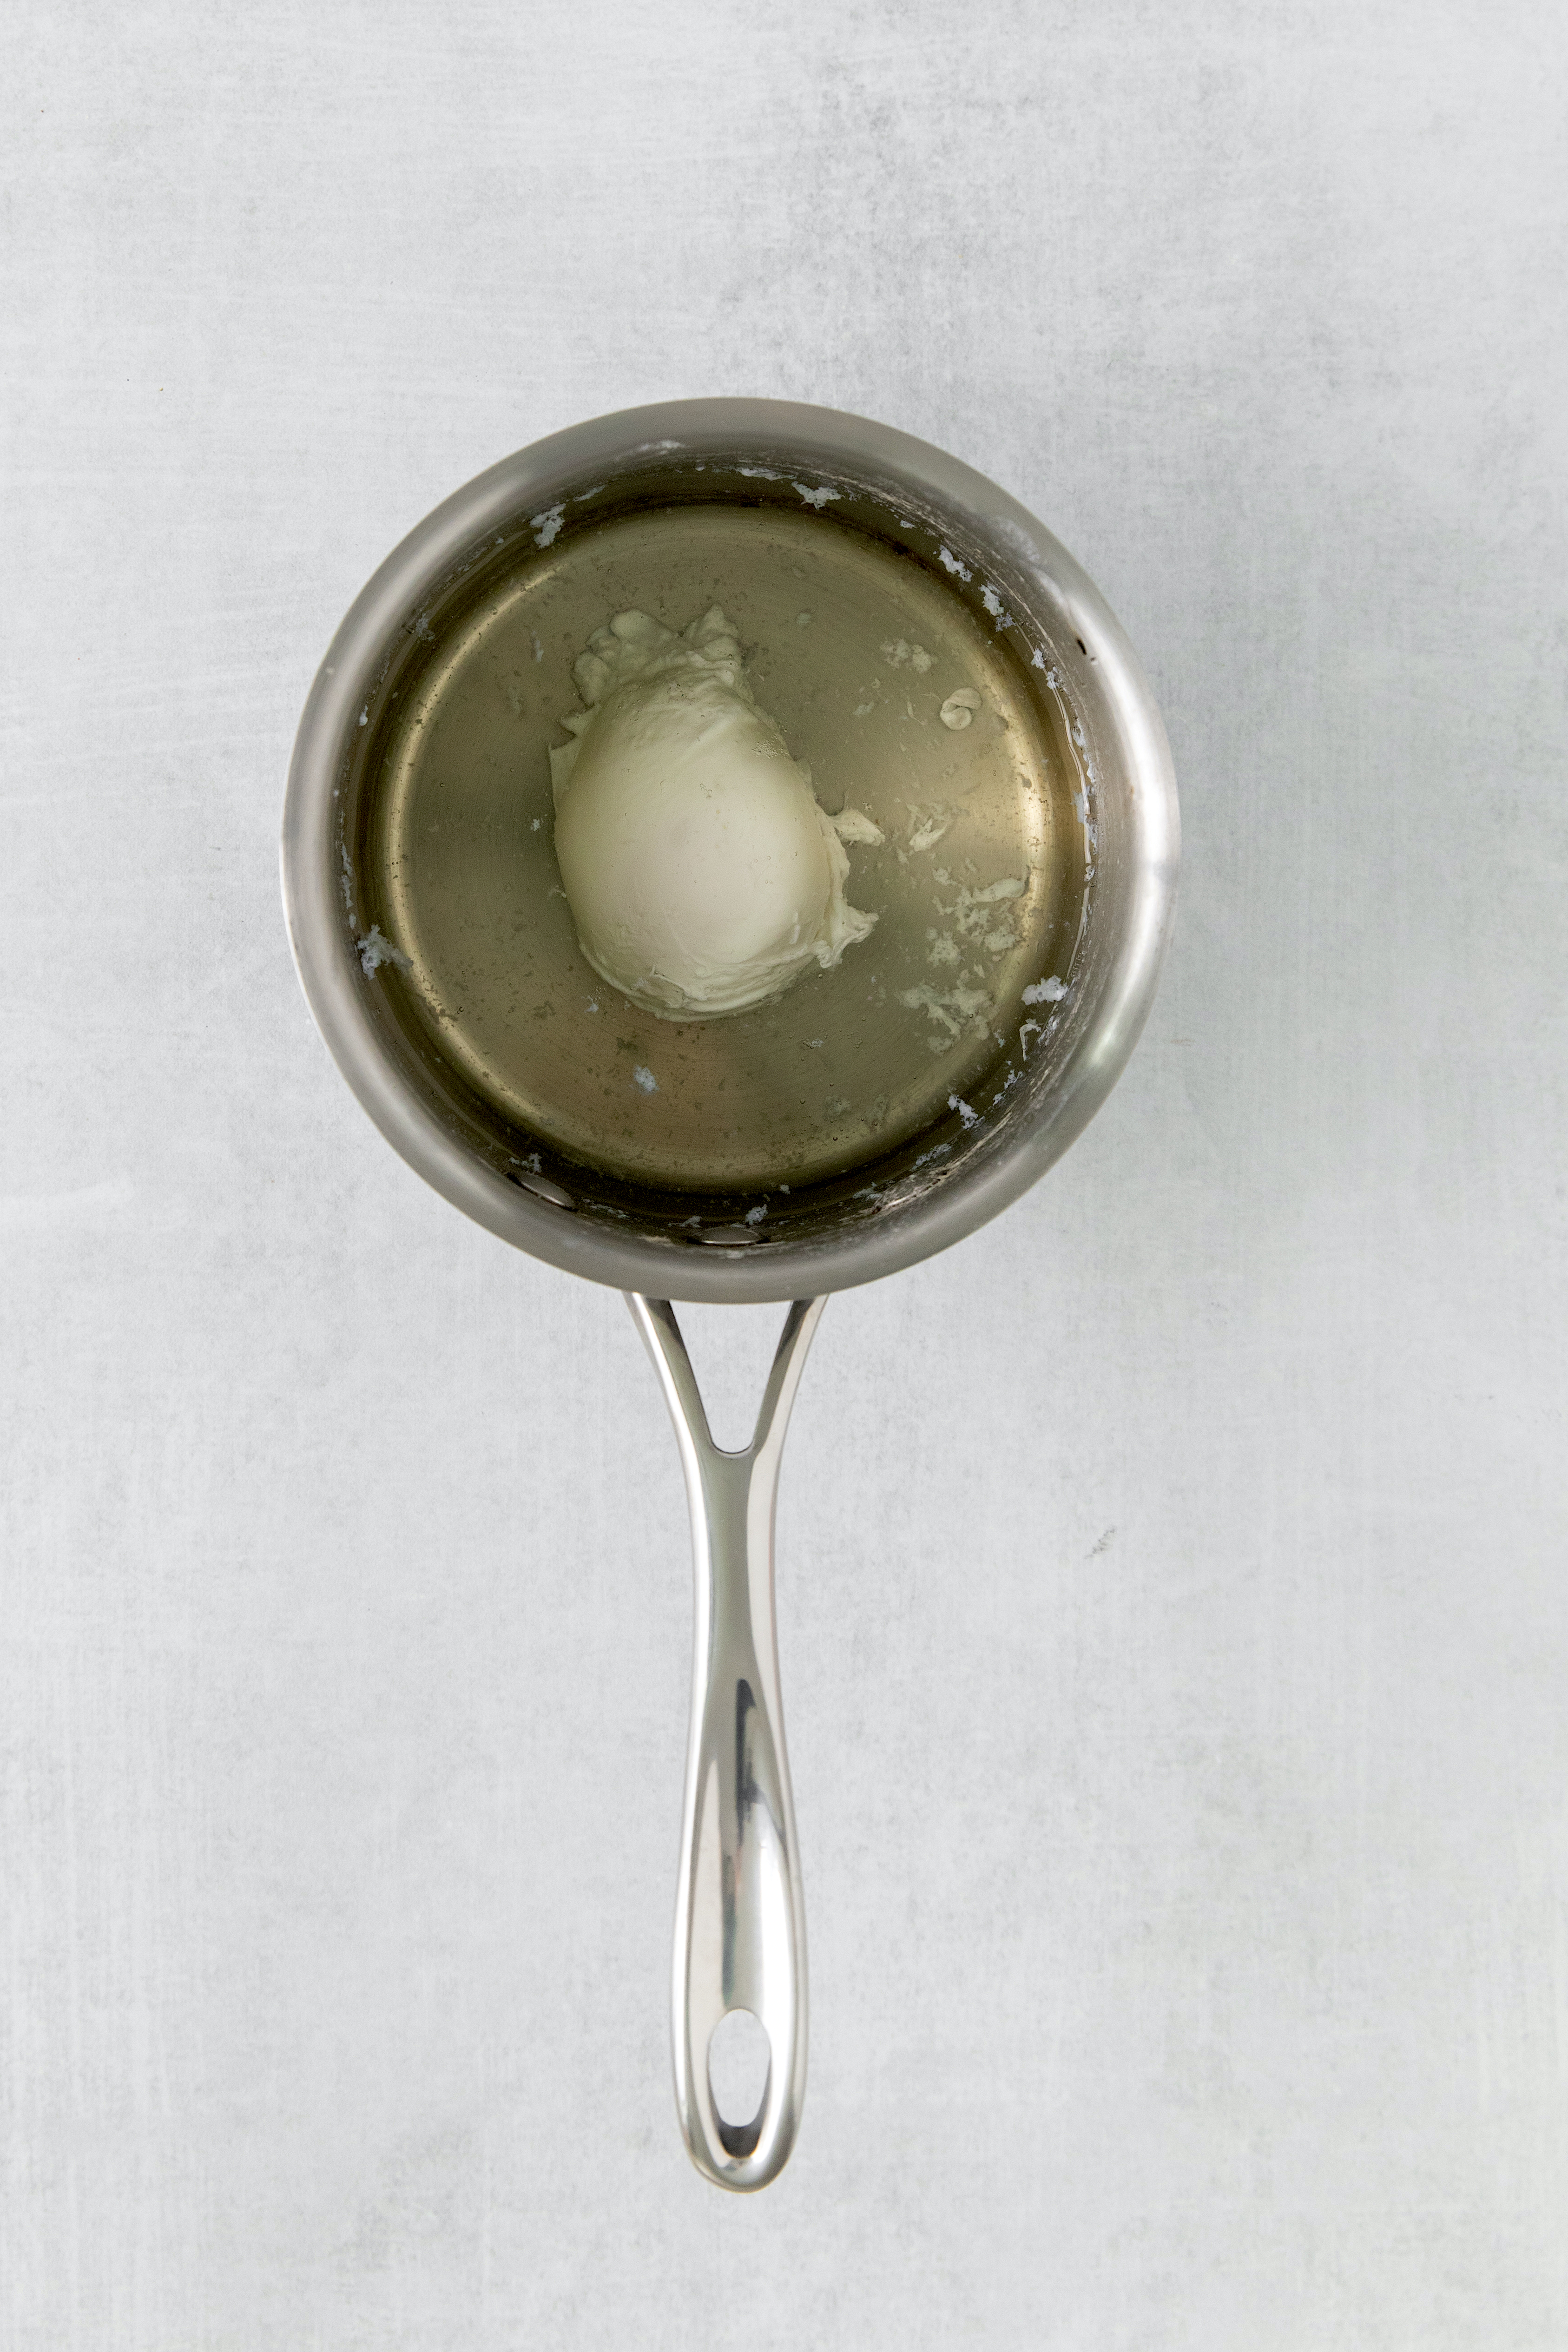 an egg in a pot of simmering water from above.